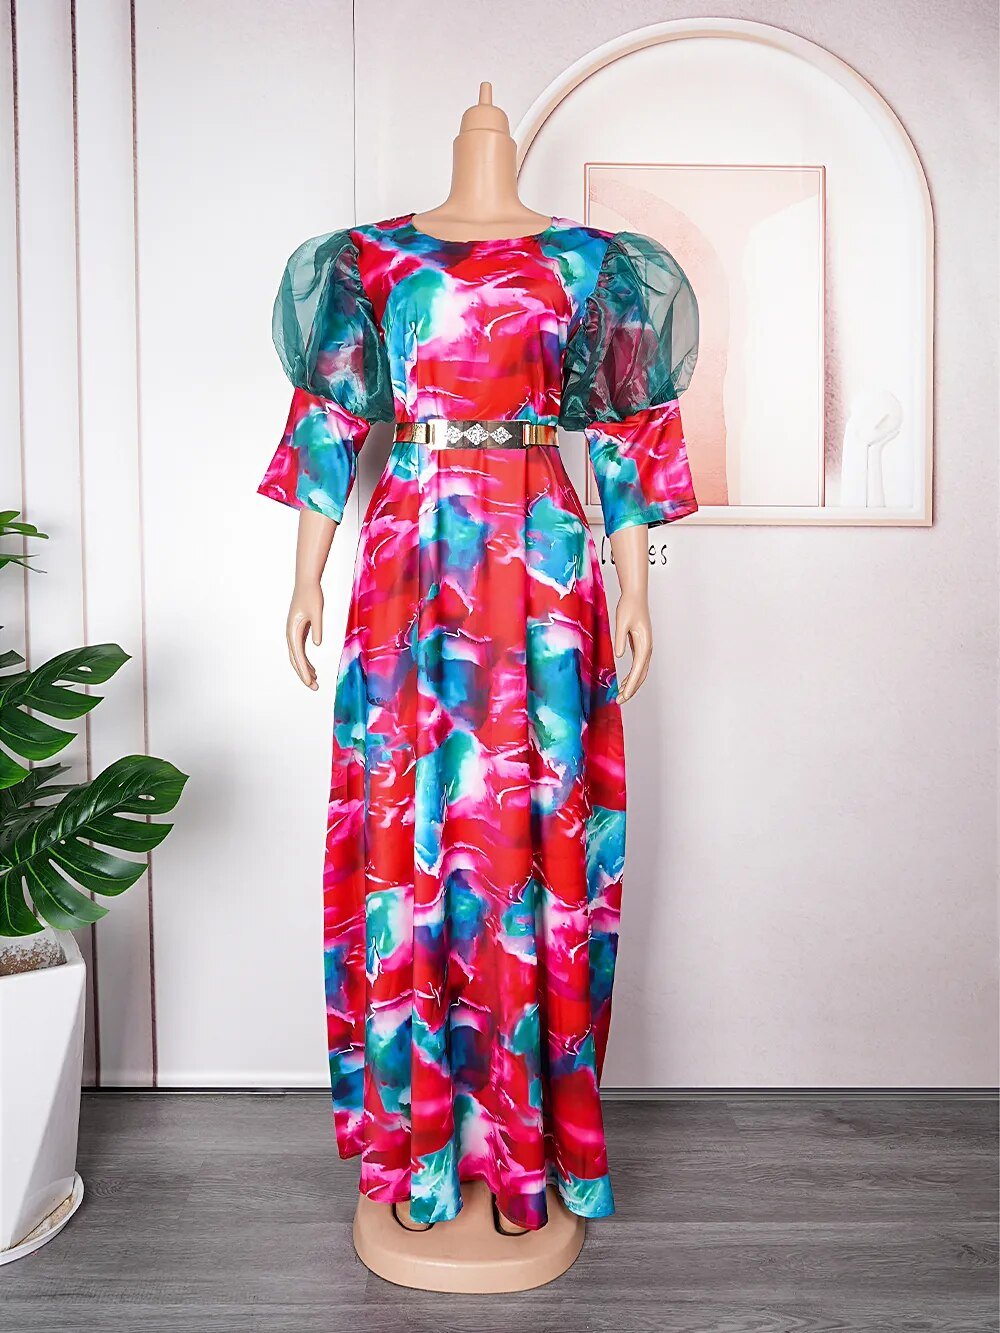 Elegant African Maxi Evening Dresses: Plus-Size Chic in Kaftan Chiffon - Flexi Africa - Free Delivery Worldwide only